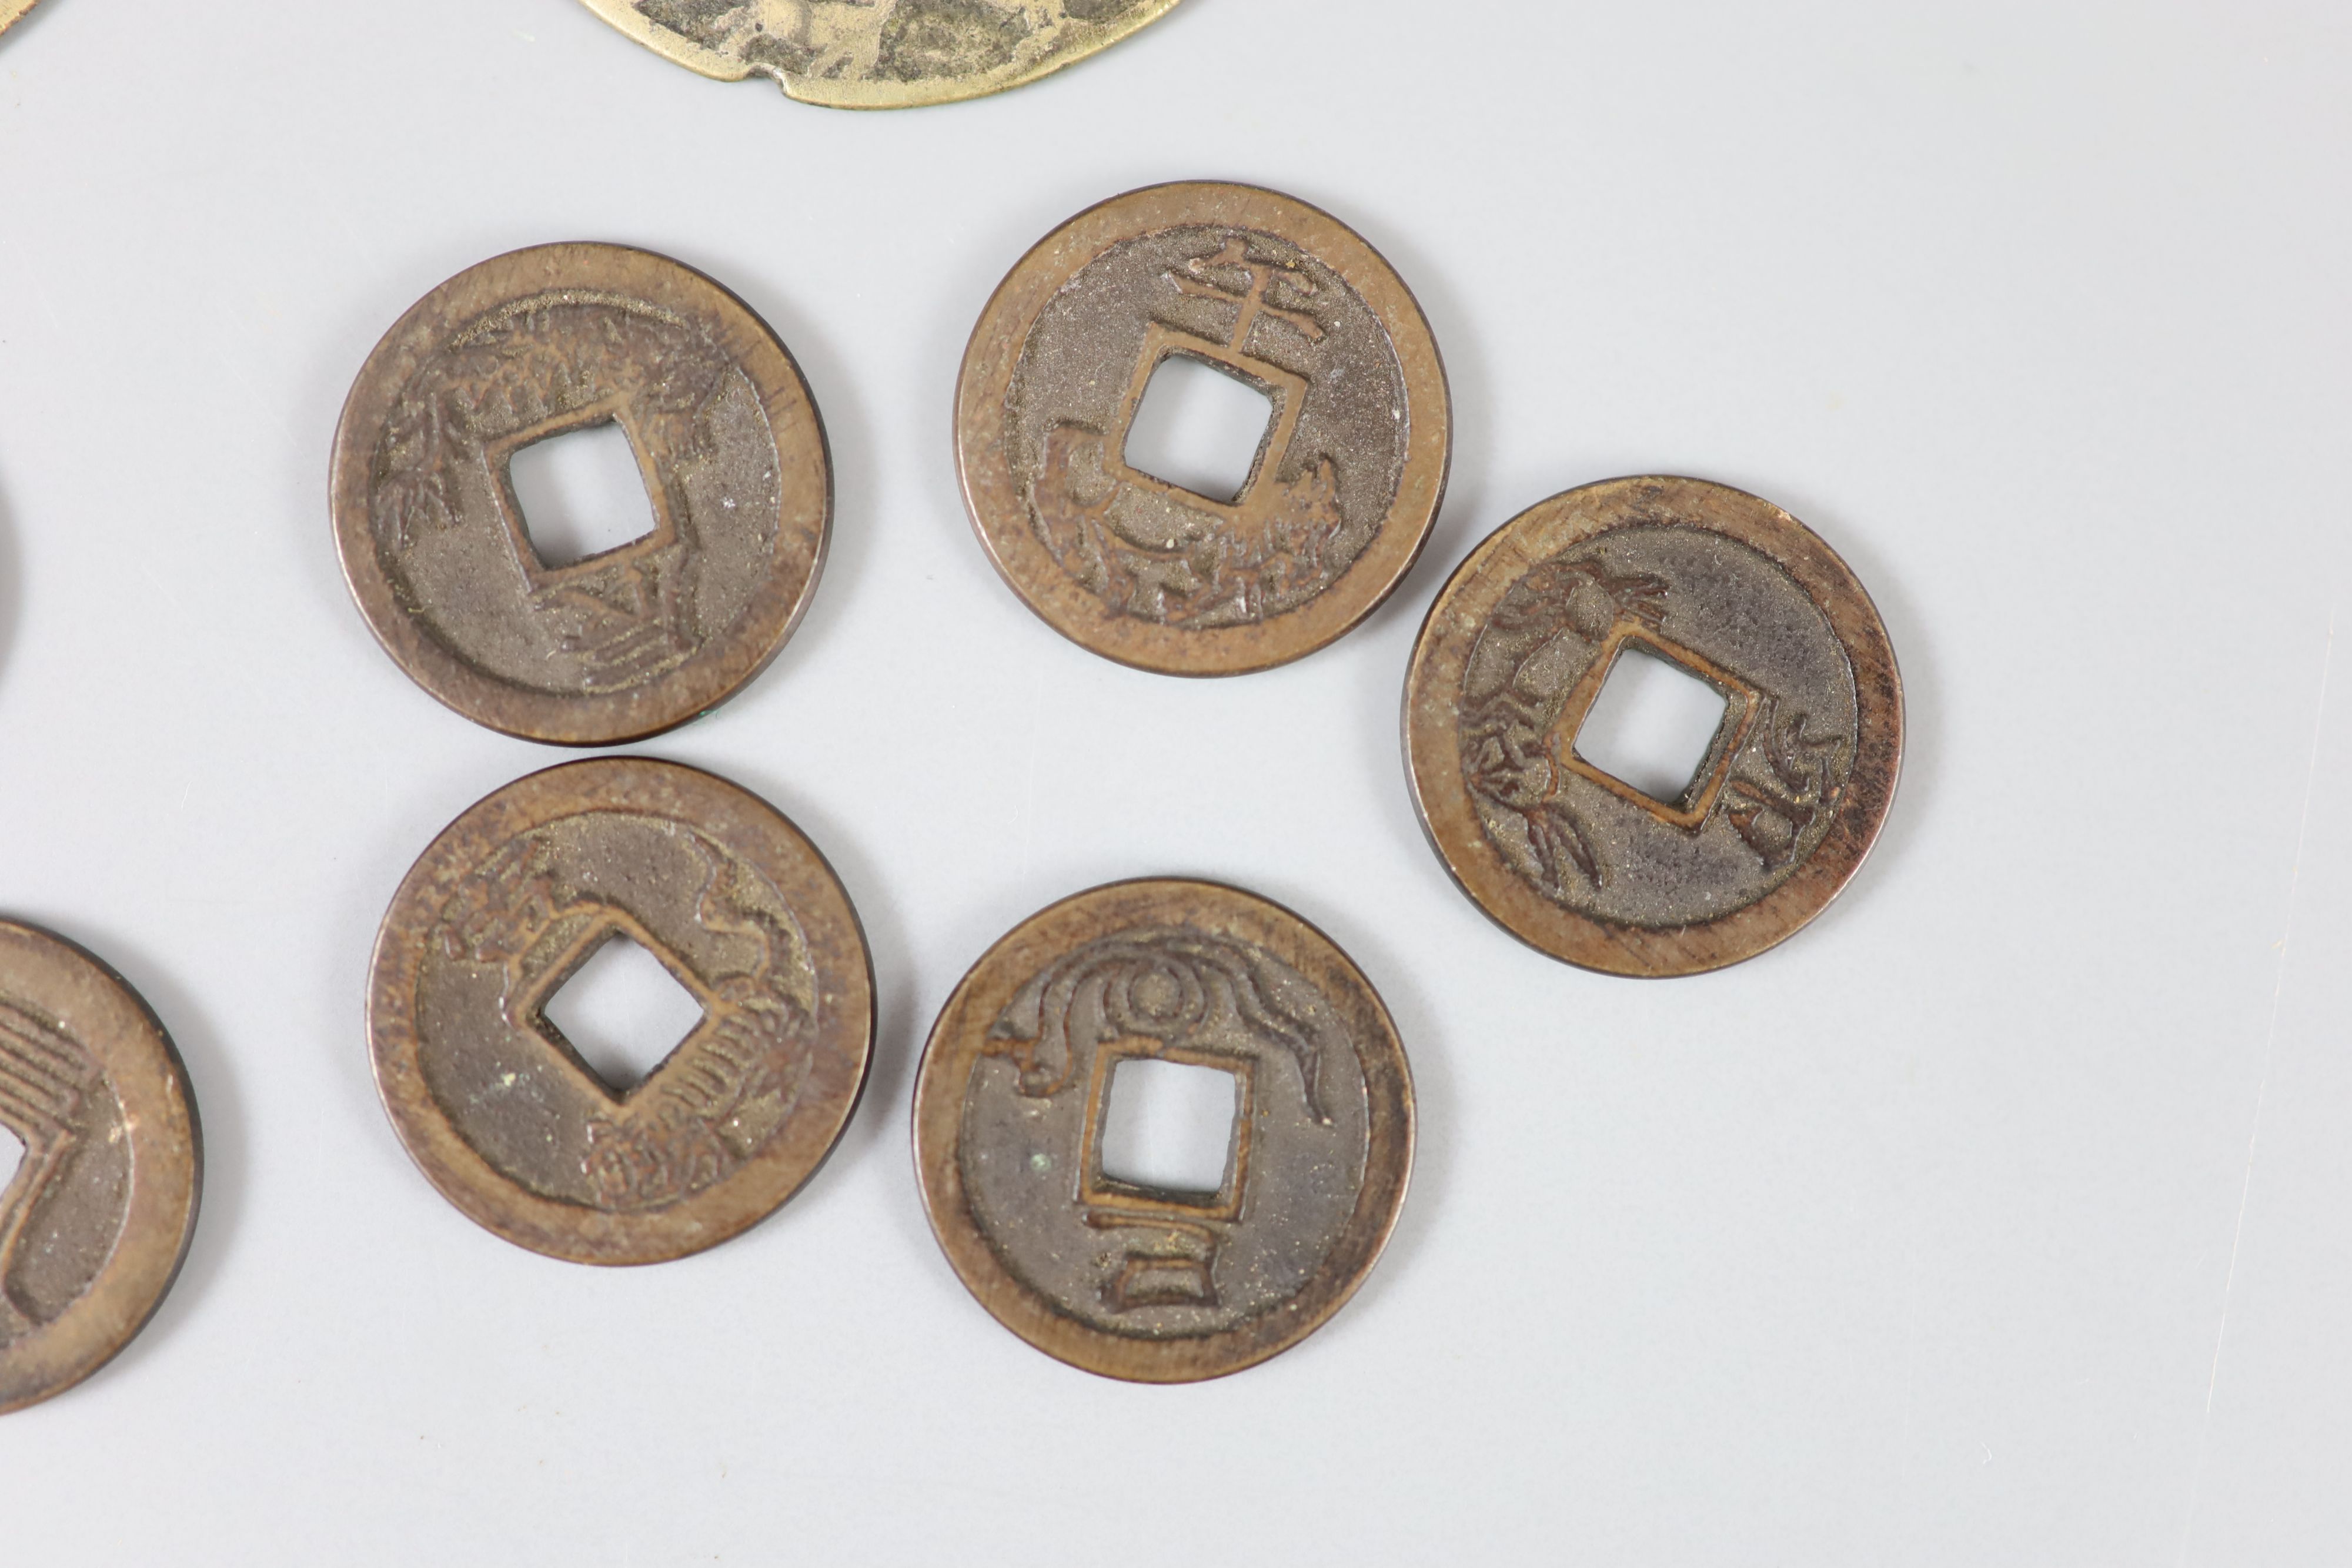 China, 19 bronze zodiac charms or amulets, Qing dynasty,